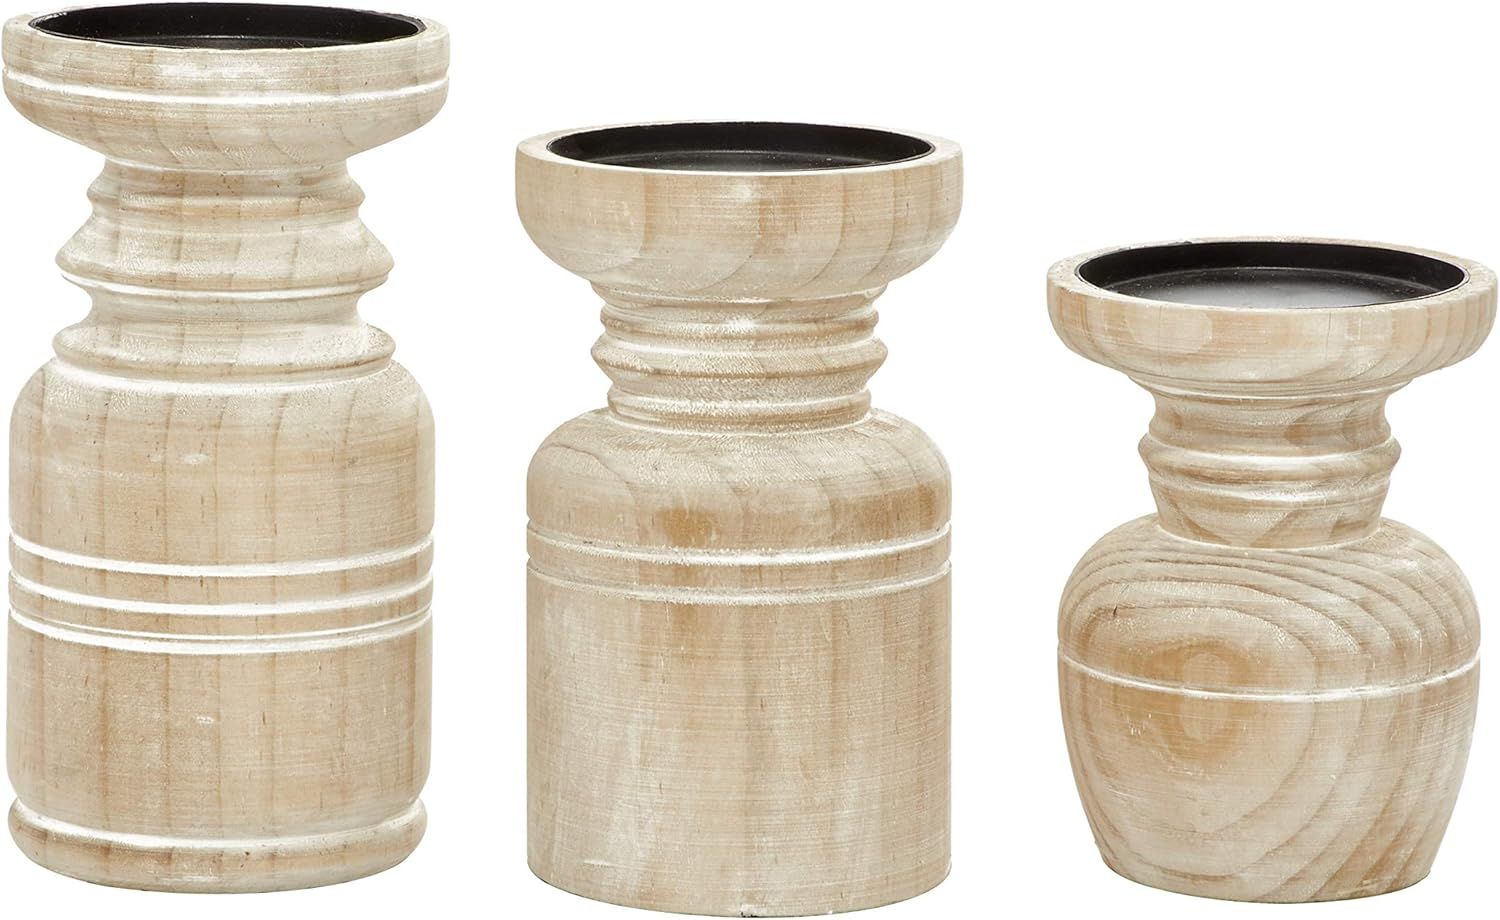 Deco 79 Wood Pillar Candle Holder with White Wash Finish, Set of 3 9", 8", 6"H, Brown | Amazon (US)